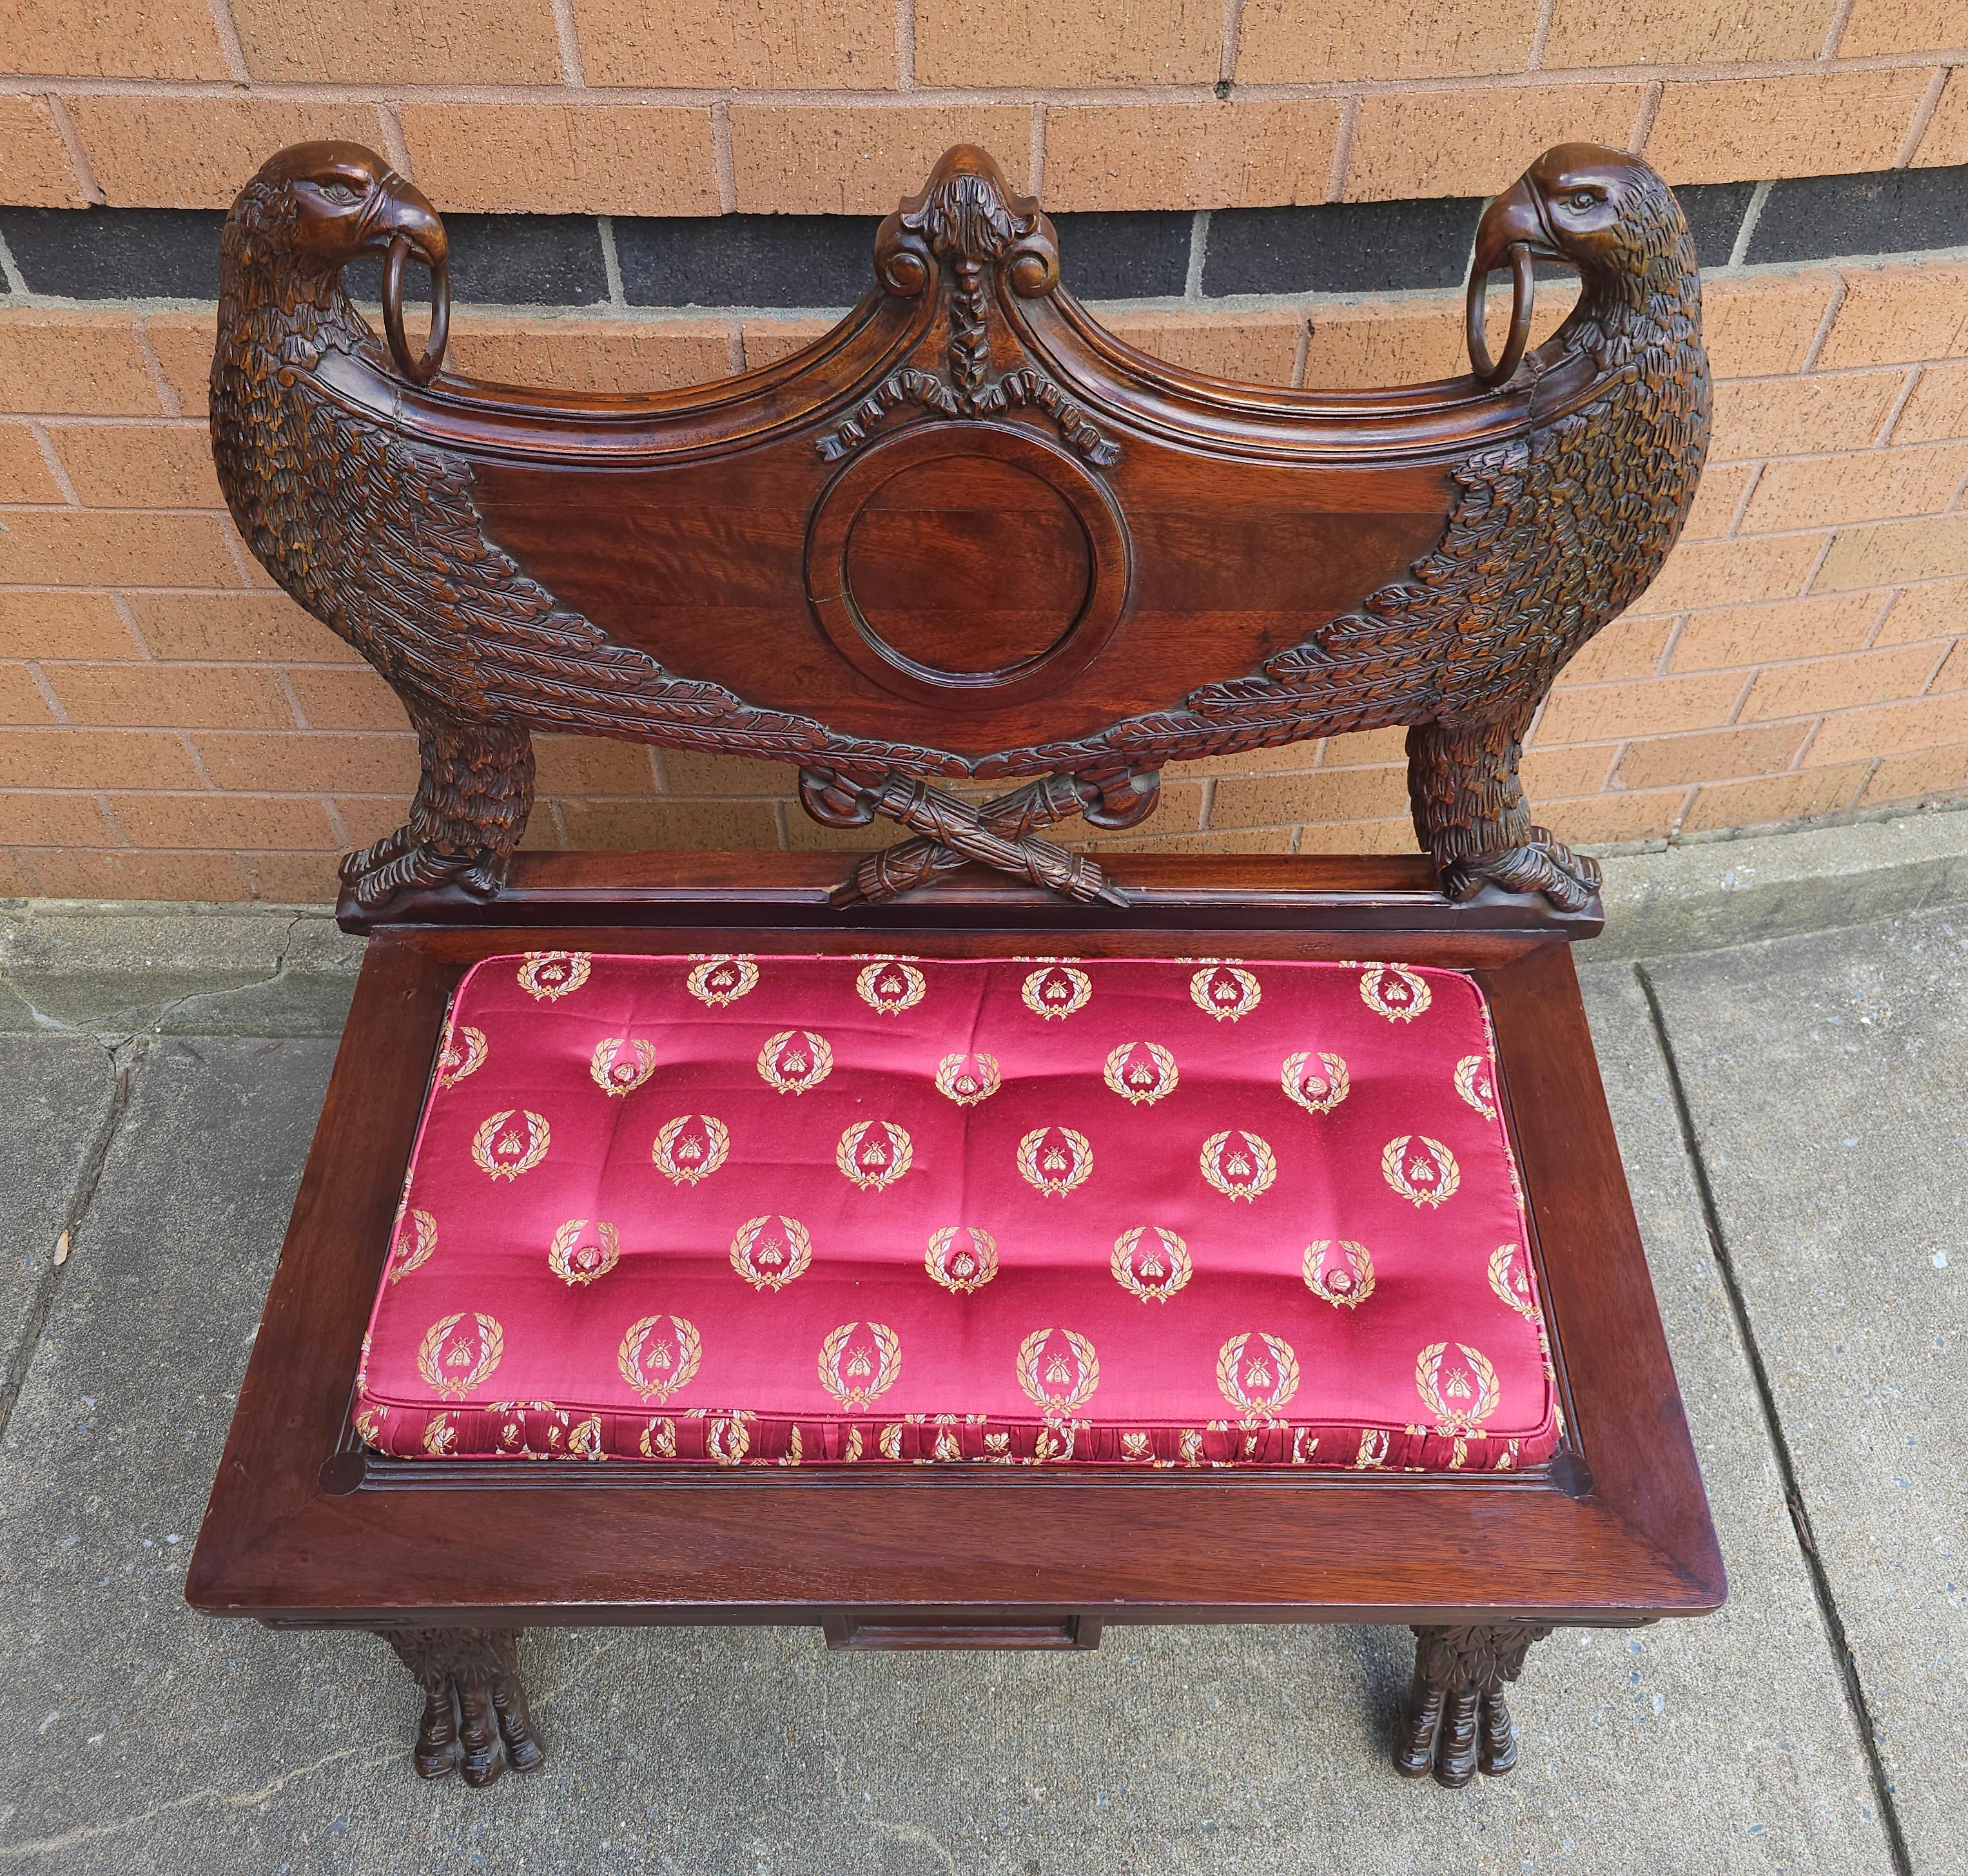 Empire Style Heraldic Coat of Arms Carved Mahogany Double Eagle Bench In Good Condition For Sale In Germantown, MD